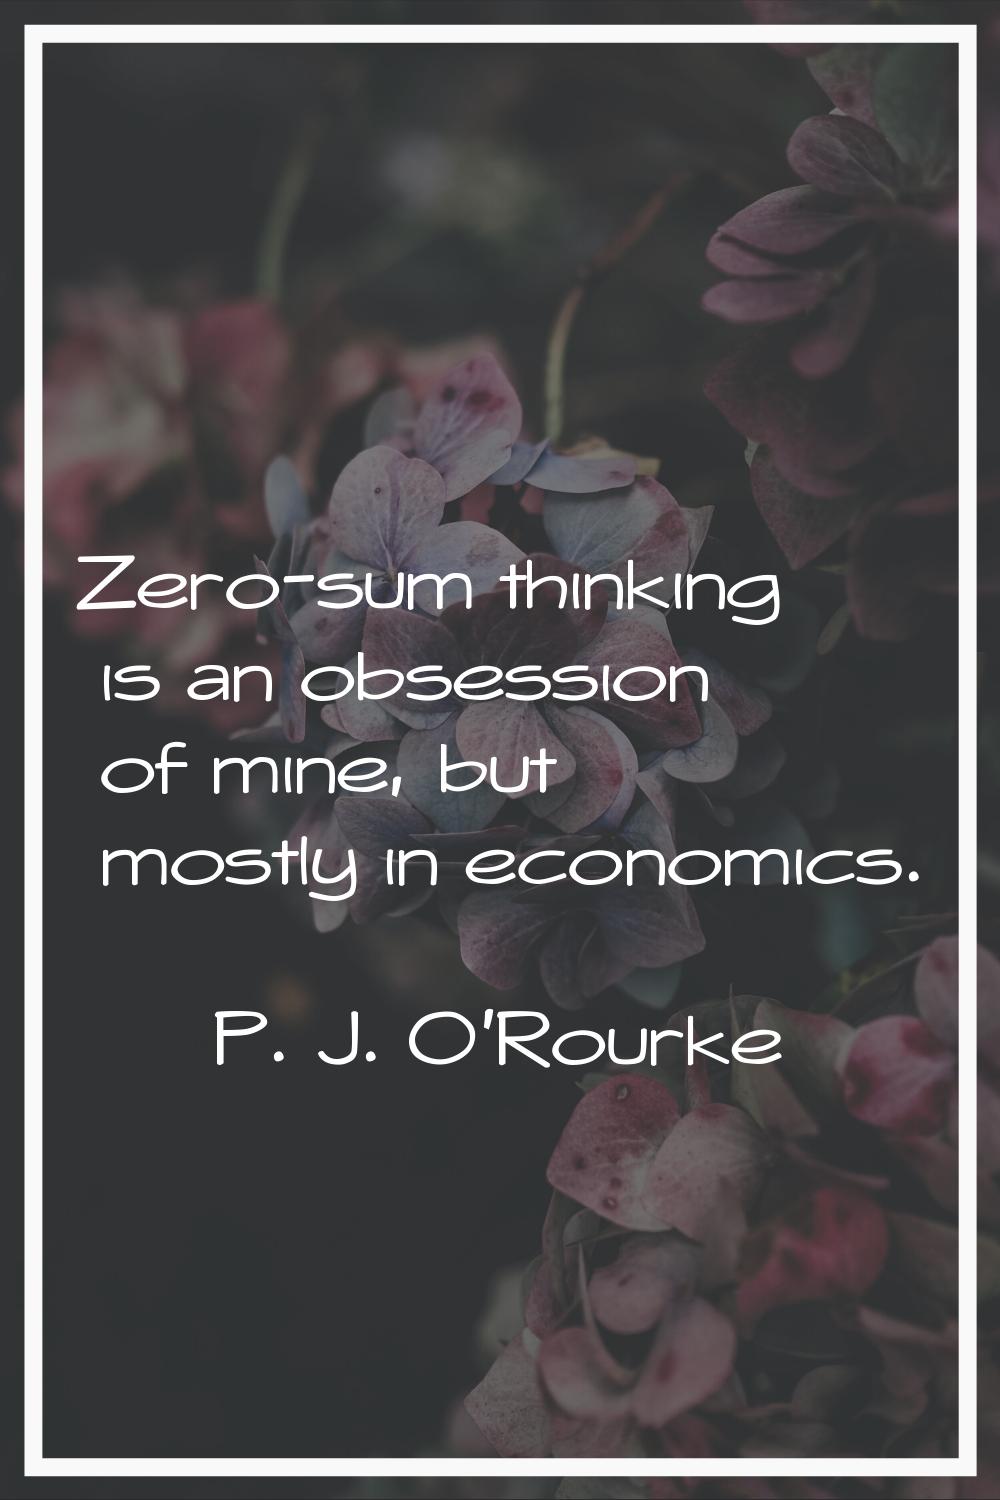 Zero-sum thinking is an obsession of mine, but mostly in economics.